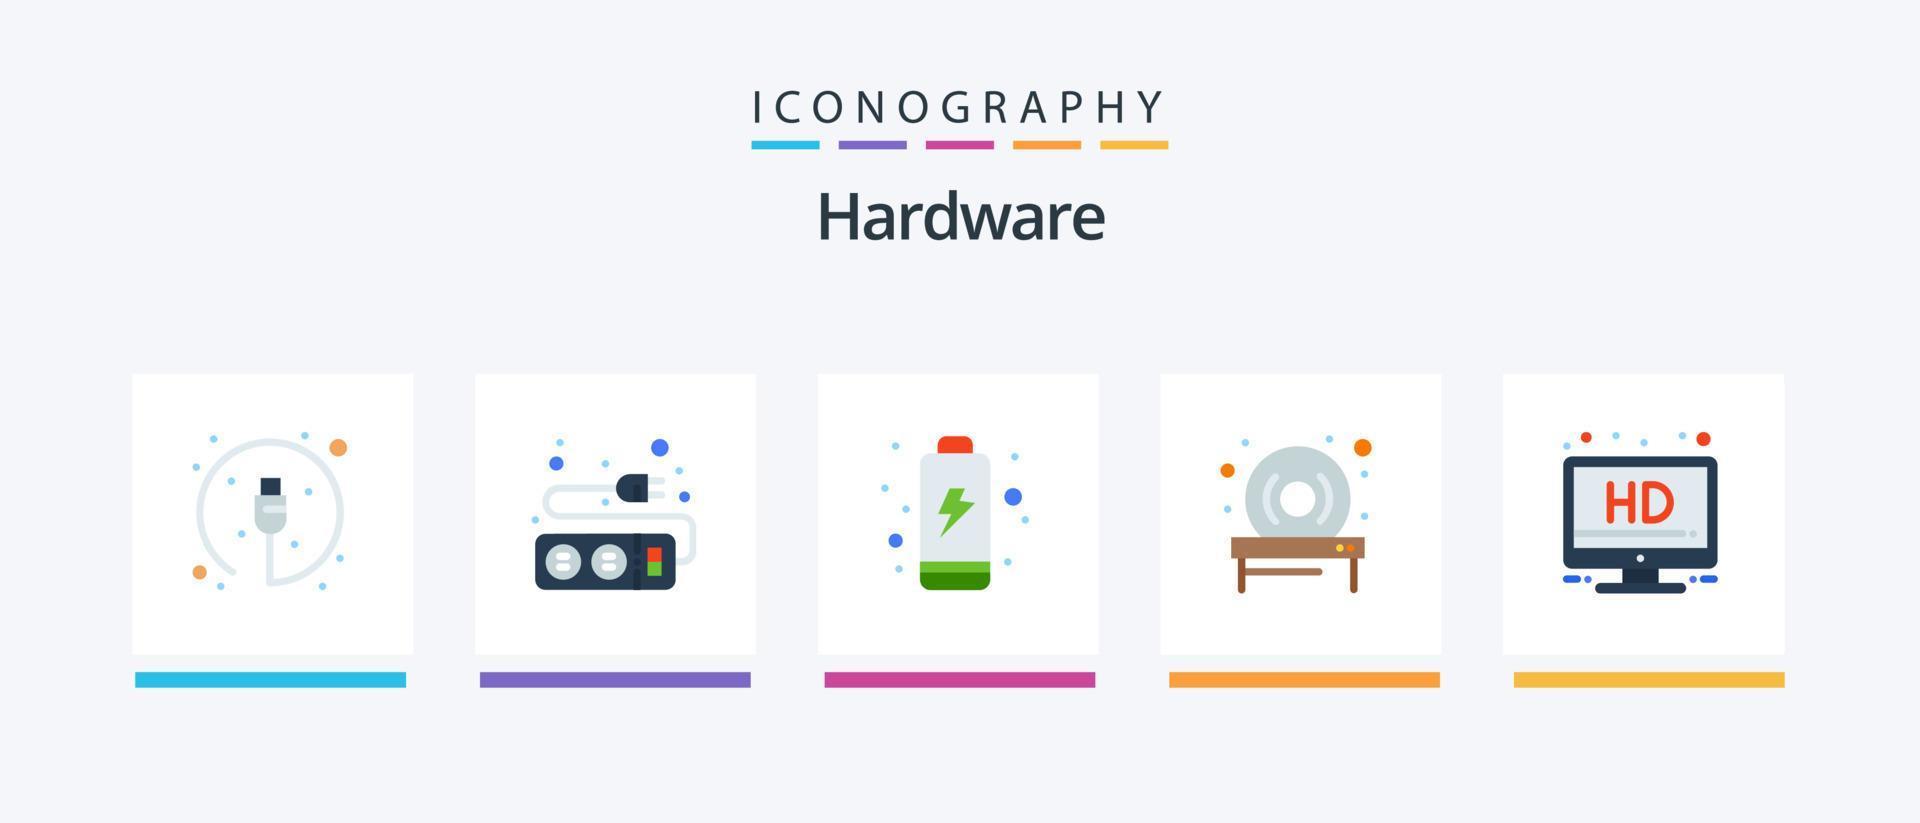 Hardware Flat 5 Icon Pack Including . screen. battery. hd. drive. Creative Icons Design vector